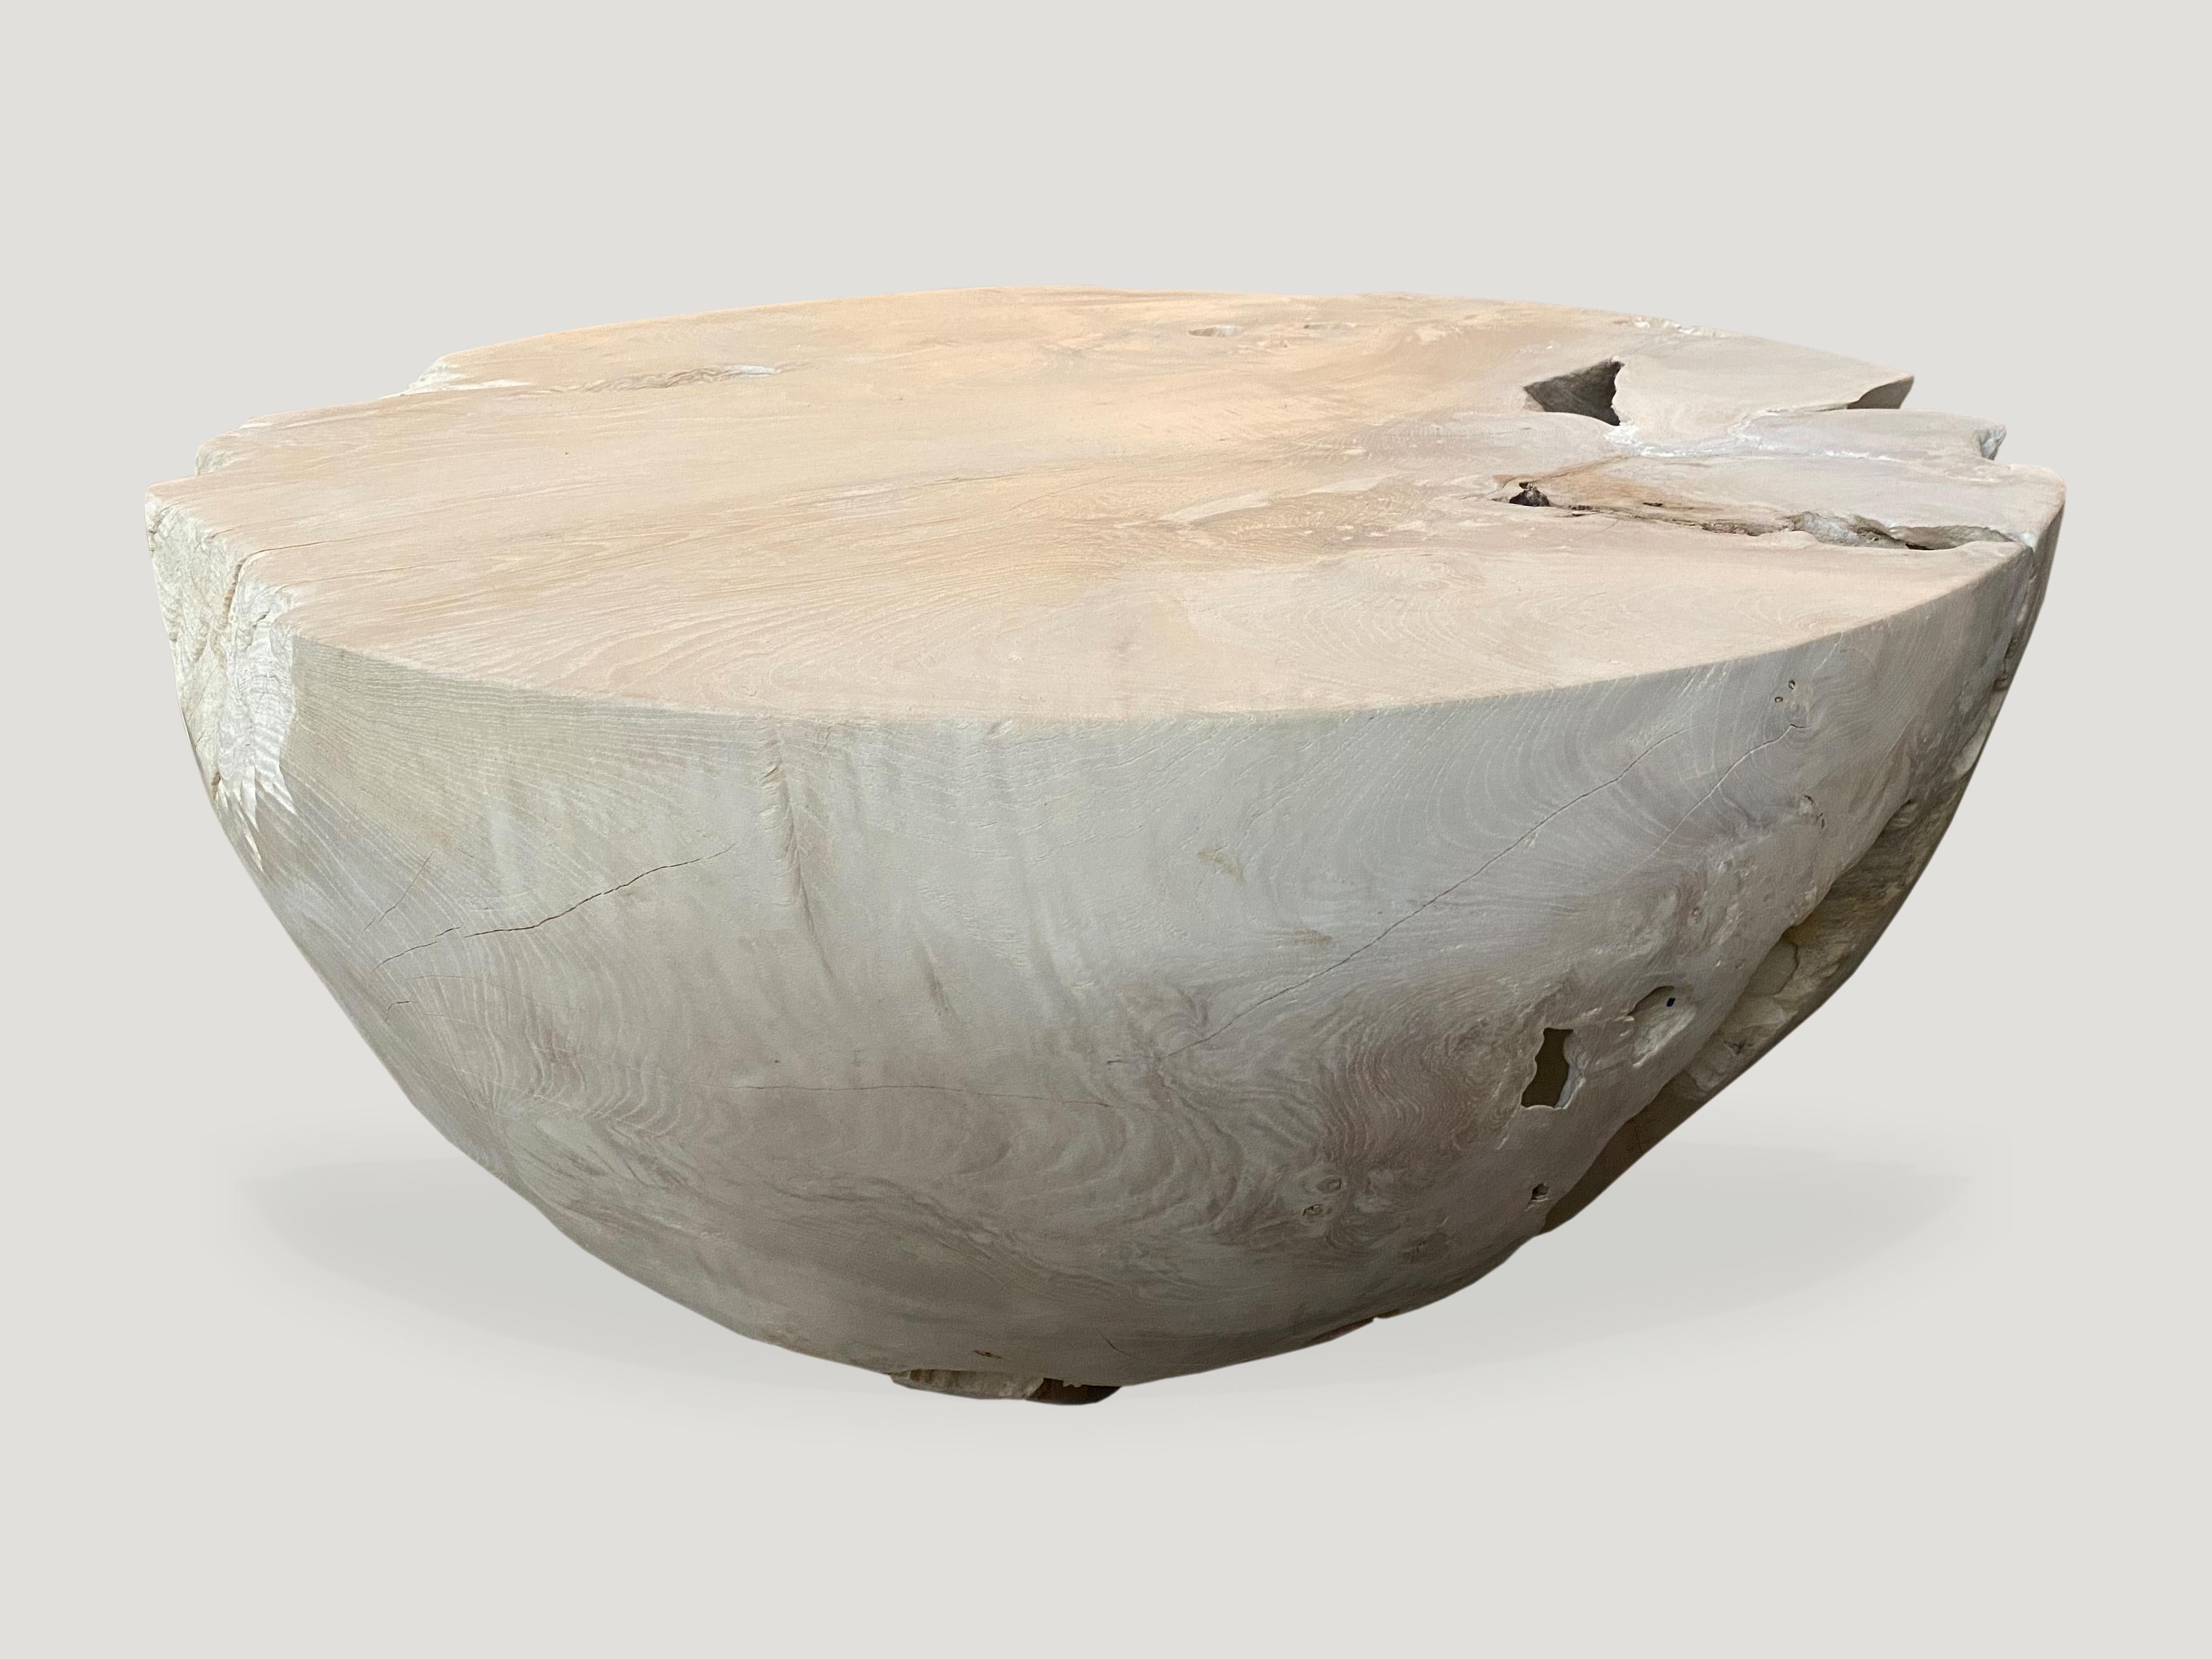 Organic round reclaimed teak wood coffee table, bleached with a light white washed finish. Perfect for inside or outside living. We can also produce this shape charred or natural teak. Please inquire.

The St. Barts collection features an exciting